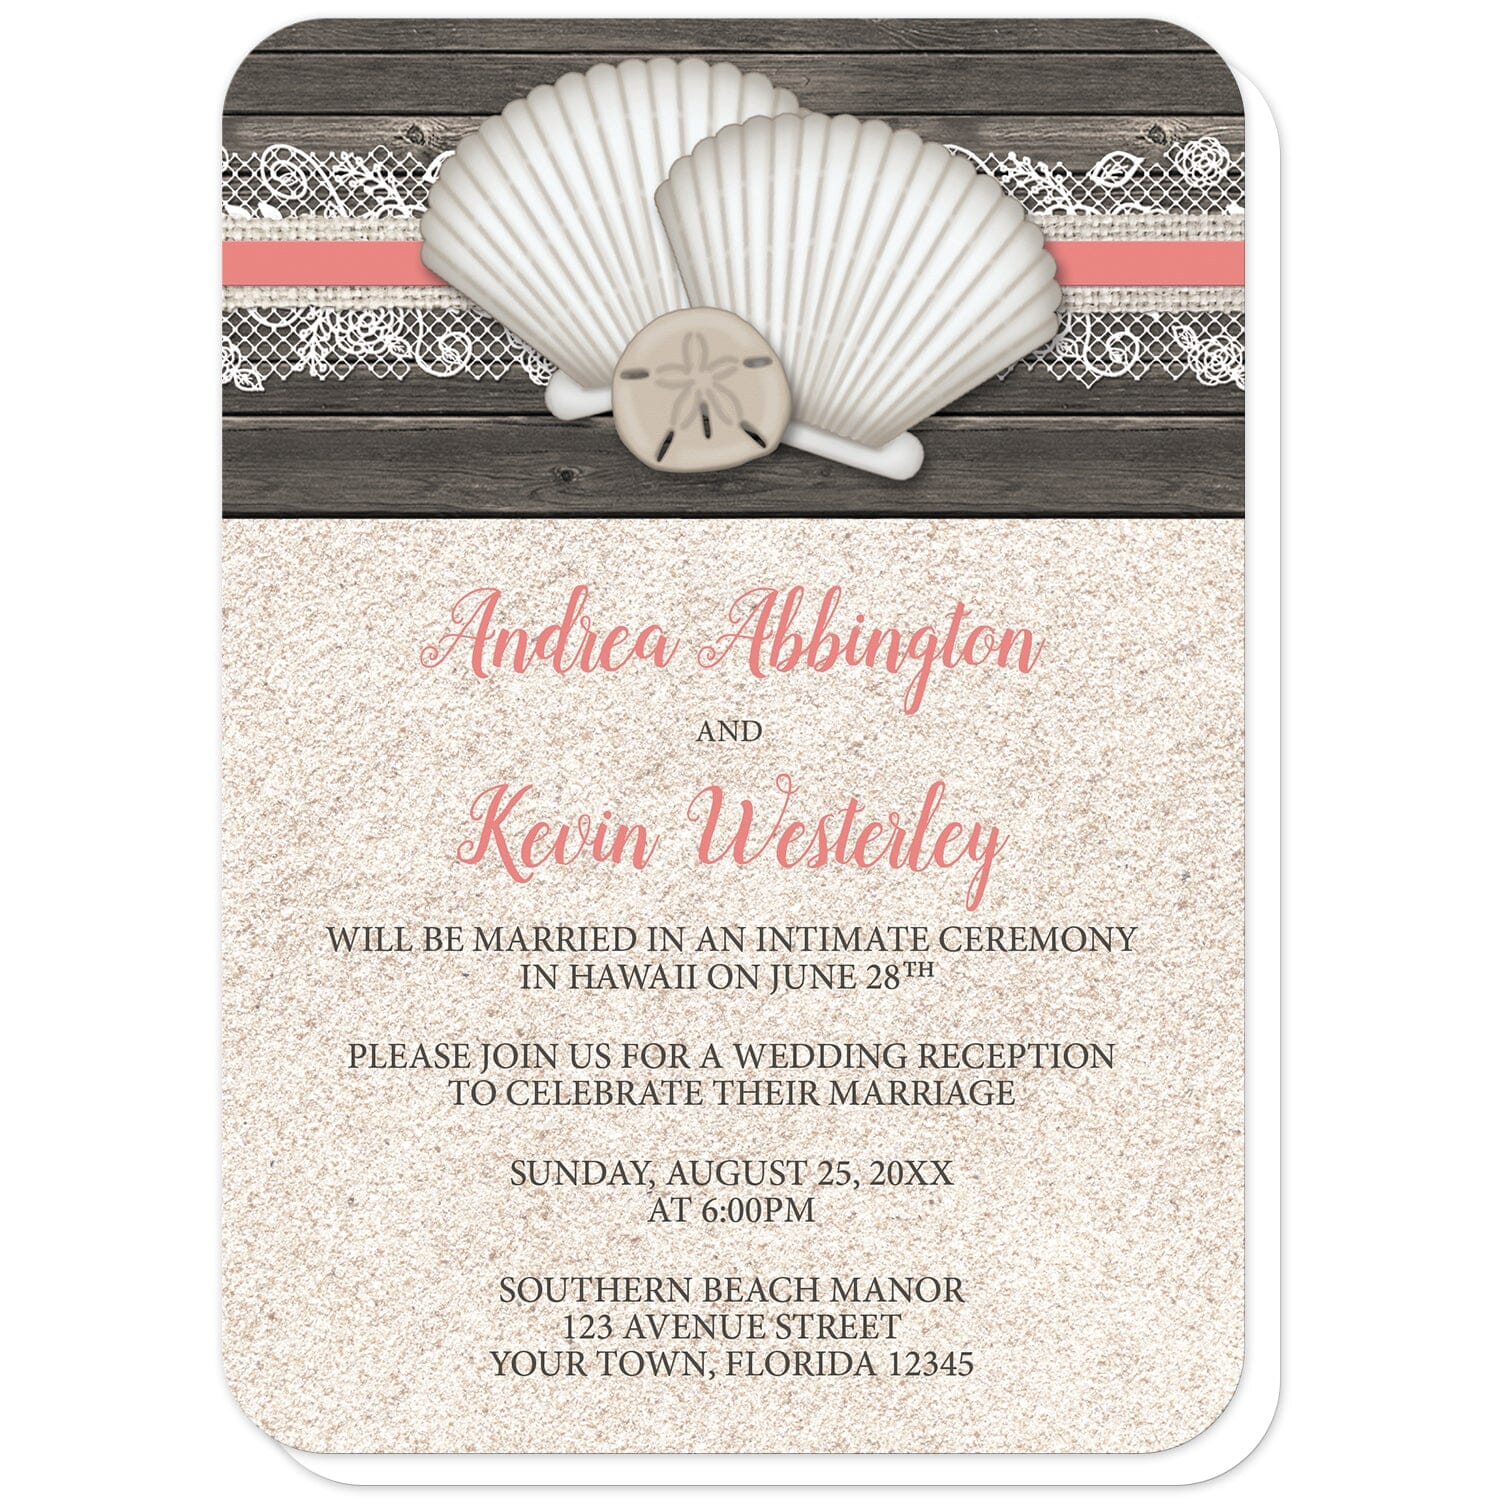 Seashell Lace Wood and Sand Coral Beach Reception Only Invitations (with rounded corners) at Artistically Invited. Rustic seashell lace wood and sand coral beach reception only invitations with two seashells and a sand dollar on a coral, burlap and lace ribbon over a dark brown wood pattern along the top. Your personalized post-wedding reception details are custom printed in dark brown and coral over a beige sand background design below the seashells.